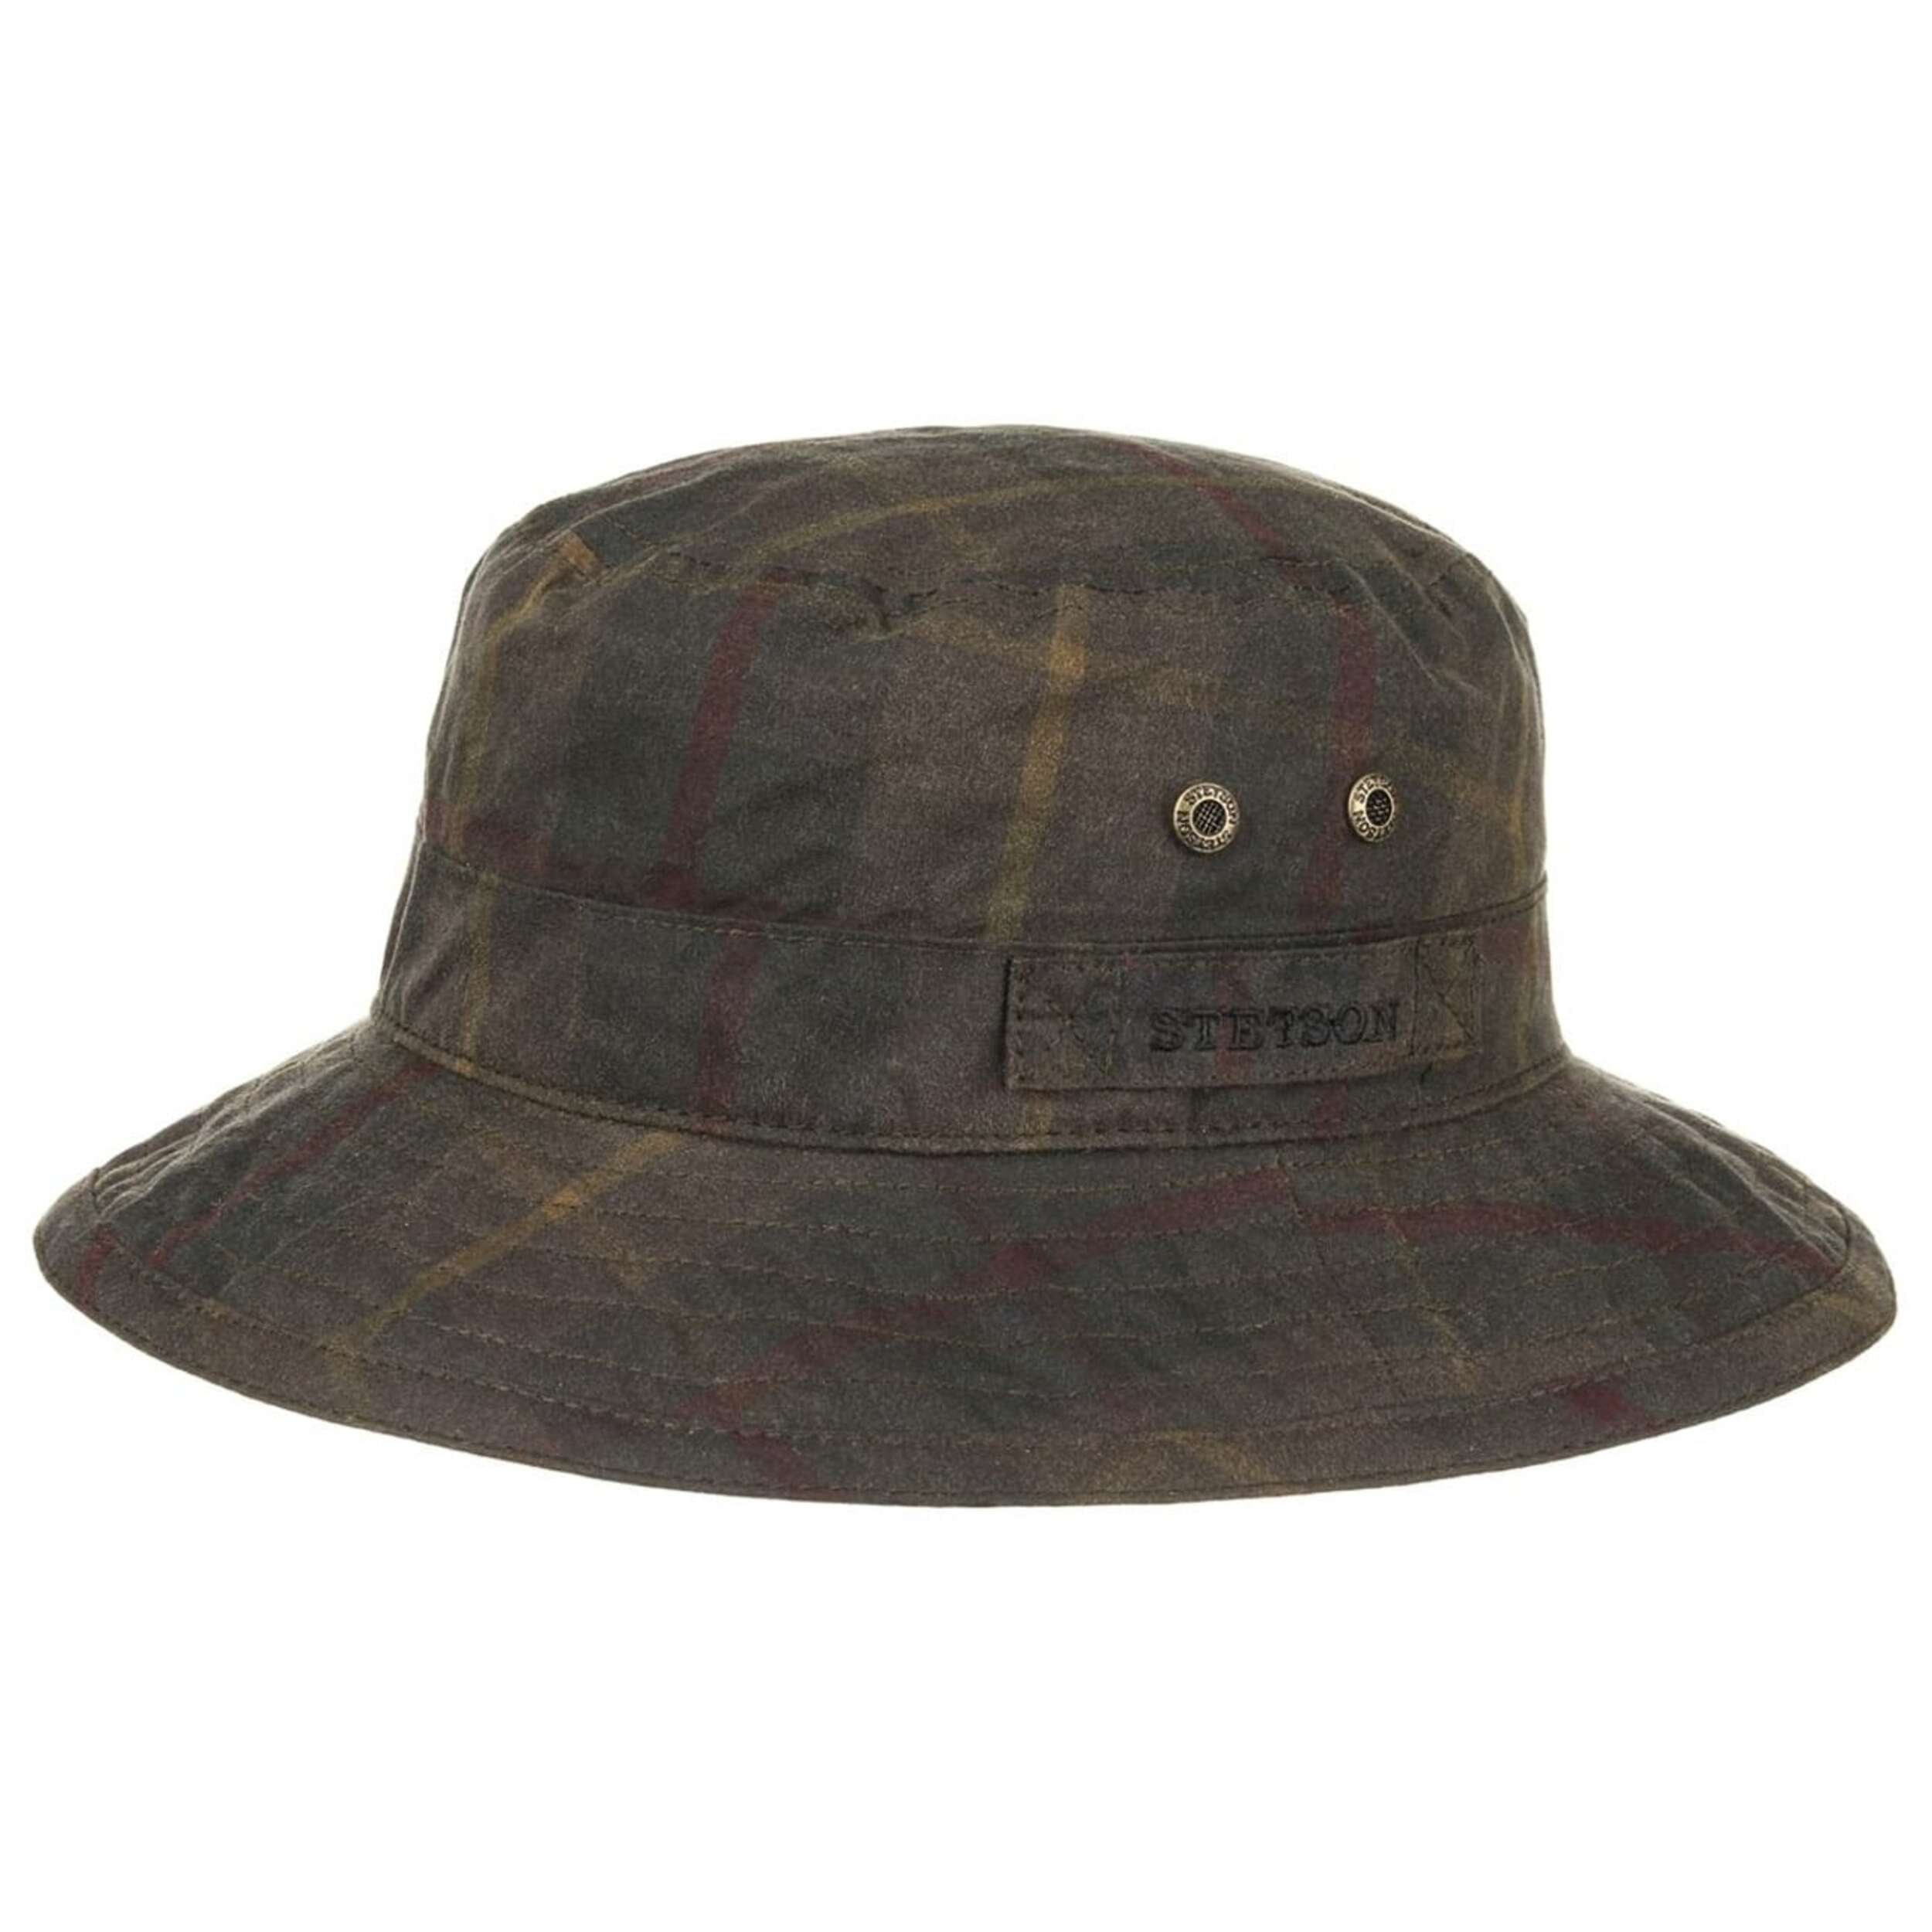 Atkins Waxed Cotton Hat by Stetson, EUR 89,00 --> Hats, caps & beanies